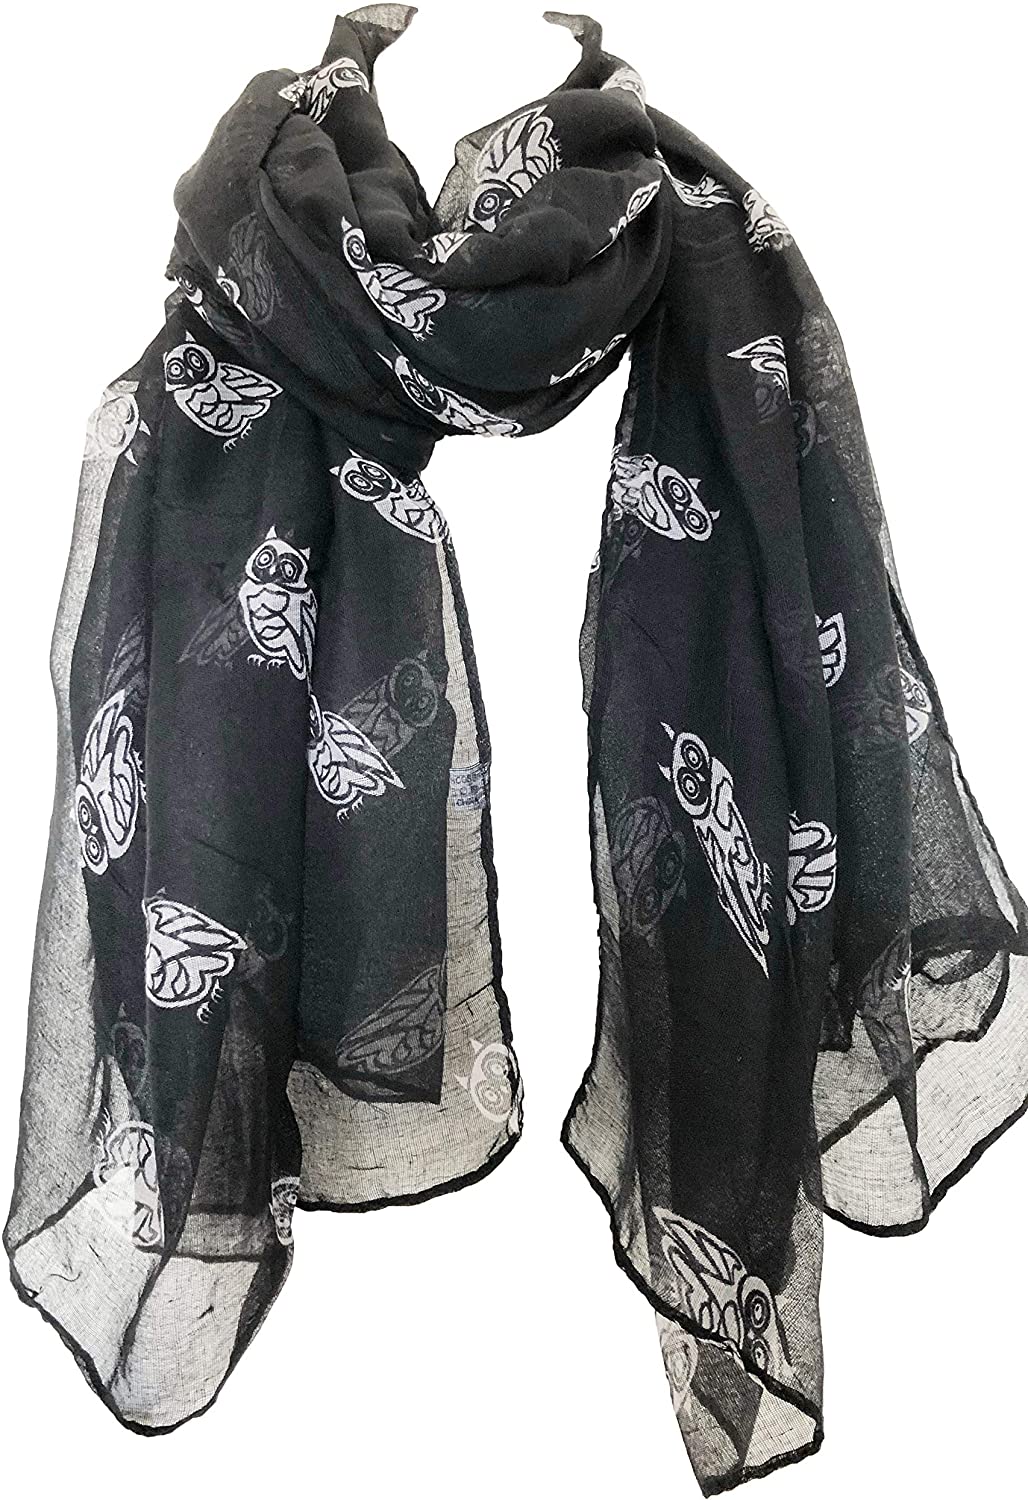 Pamper Yourself Now Women's owl Print Scarf Wraps Shawl Soft Scarves, Great for owl Lovers Ladies Gift,